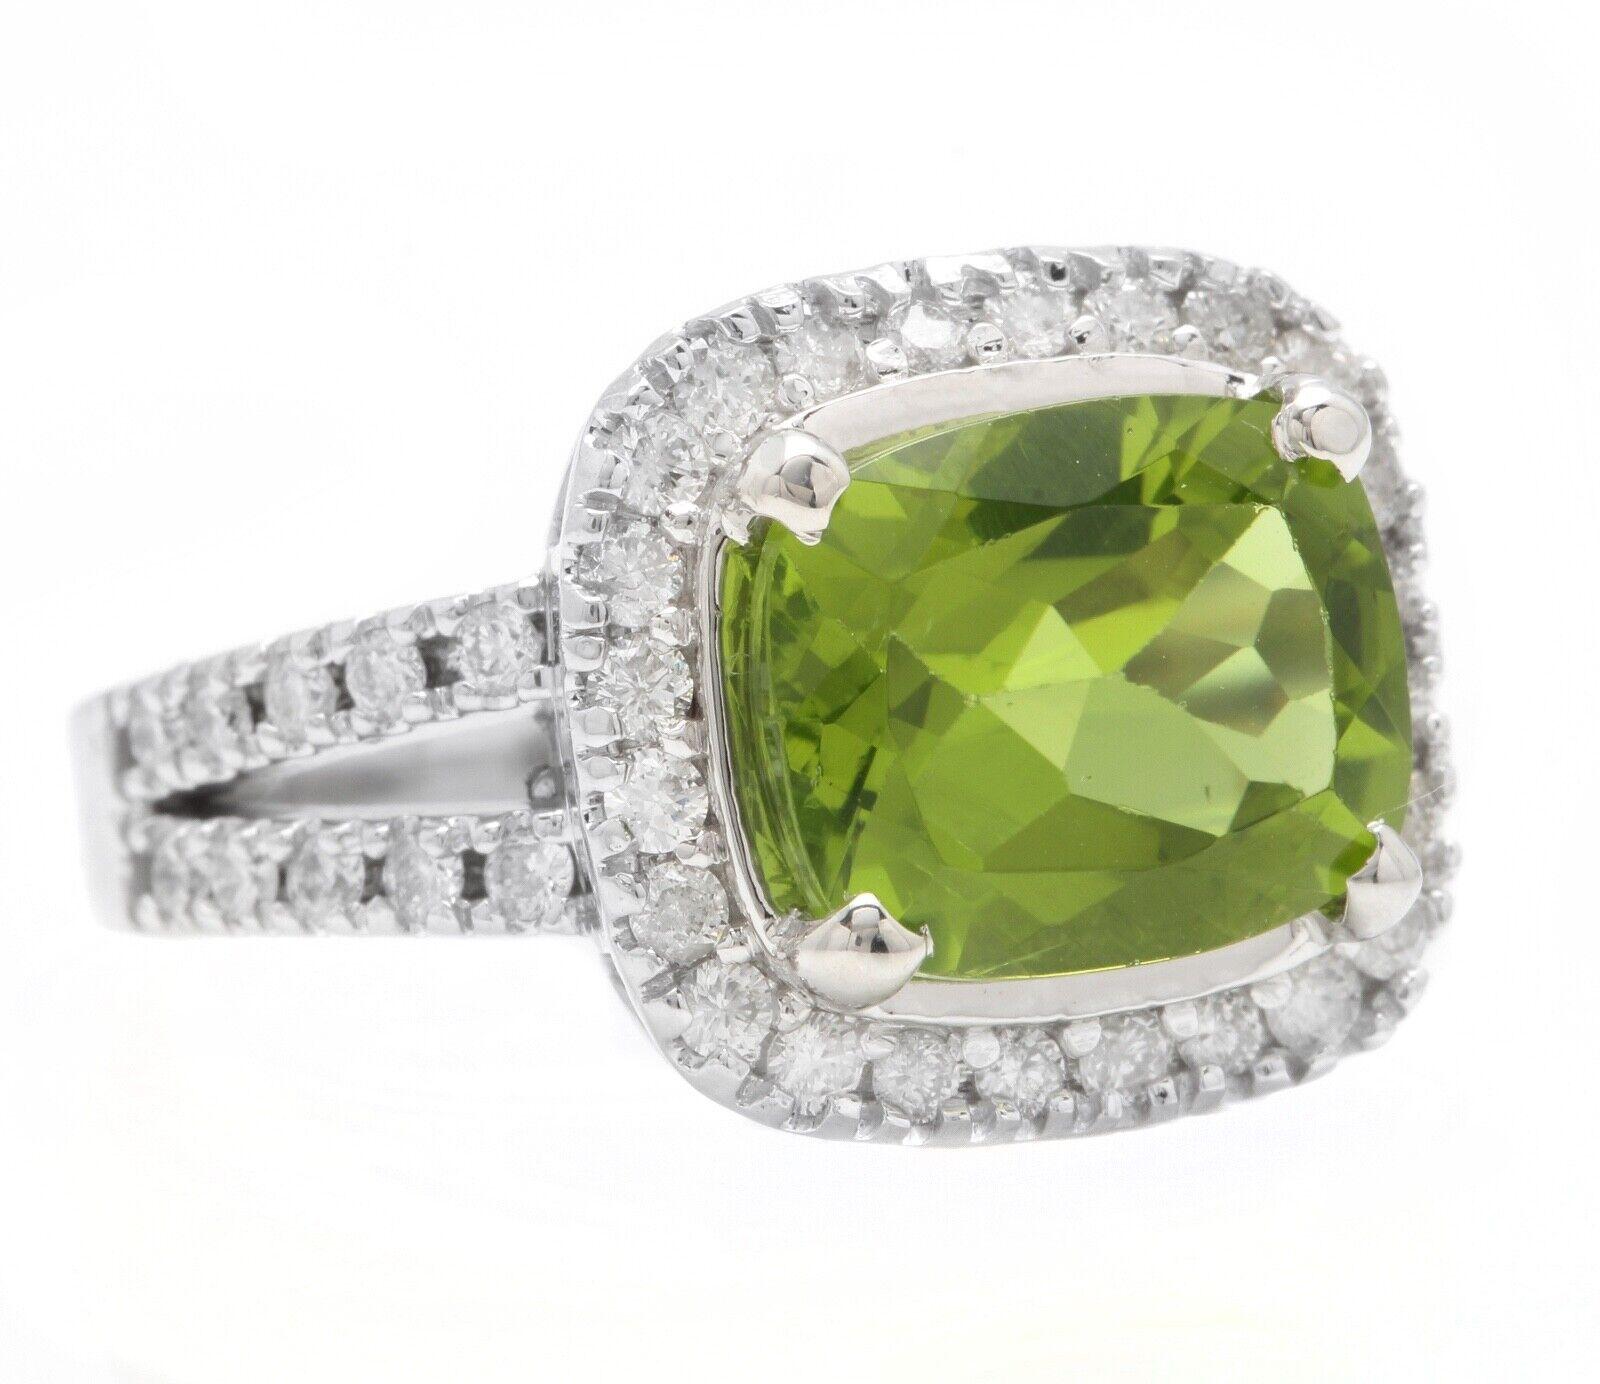 5.30 Carats Natural Very Nice Looking Peridot and Diamond 14K Solid White Gold Ring

Suggested Replacement Value:  $5,500.00

Total Natural Cushion Peridot Weight is: Approx. 4.50 Carats 

Peridot Measures: Approx. 11 x 9mm

Natural Round Diamonds